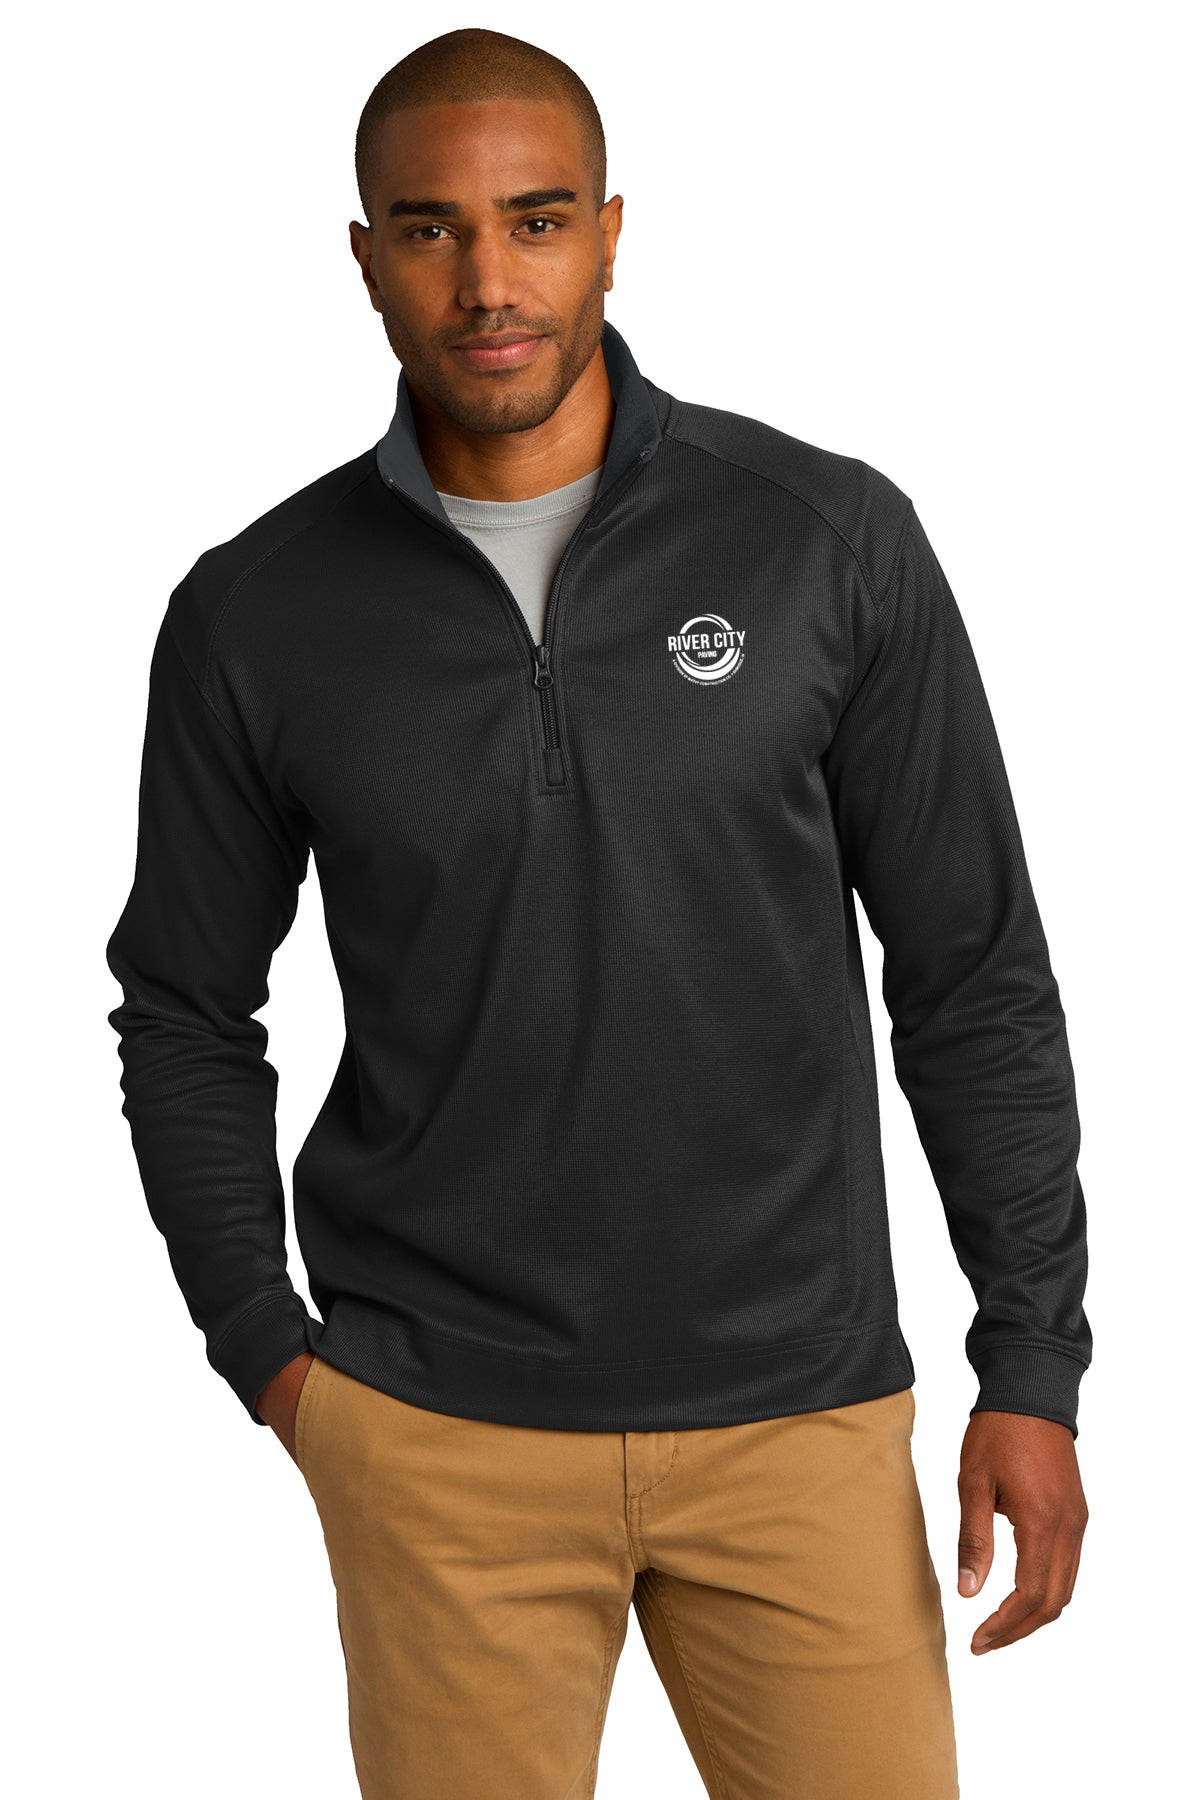 River City Paving 1/4 Zip Pullover